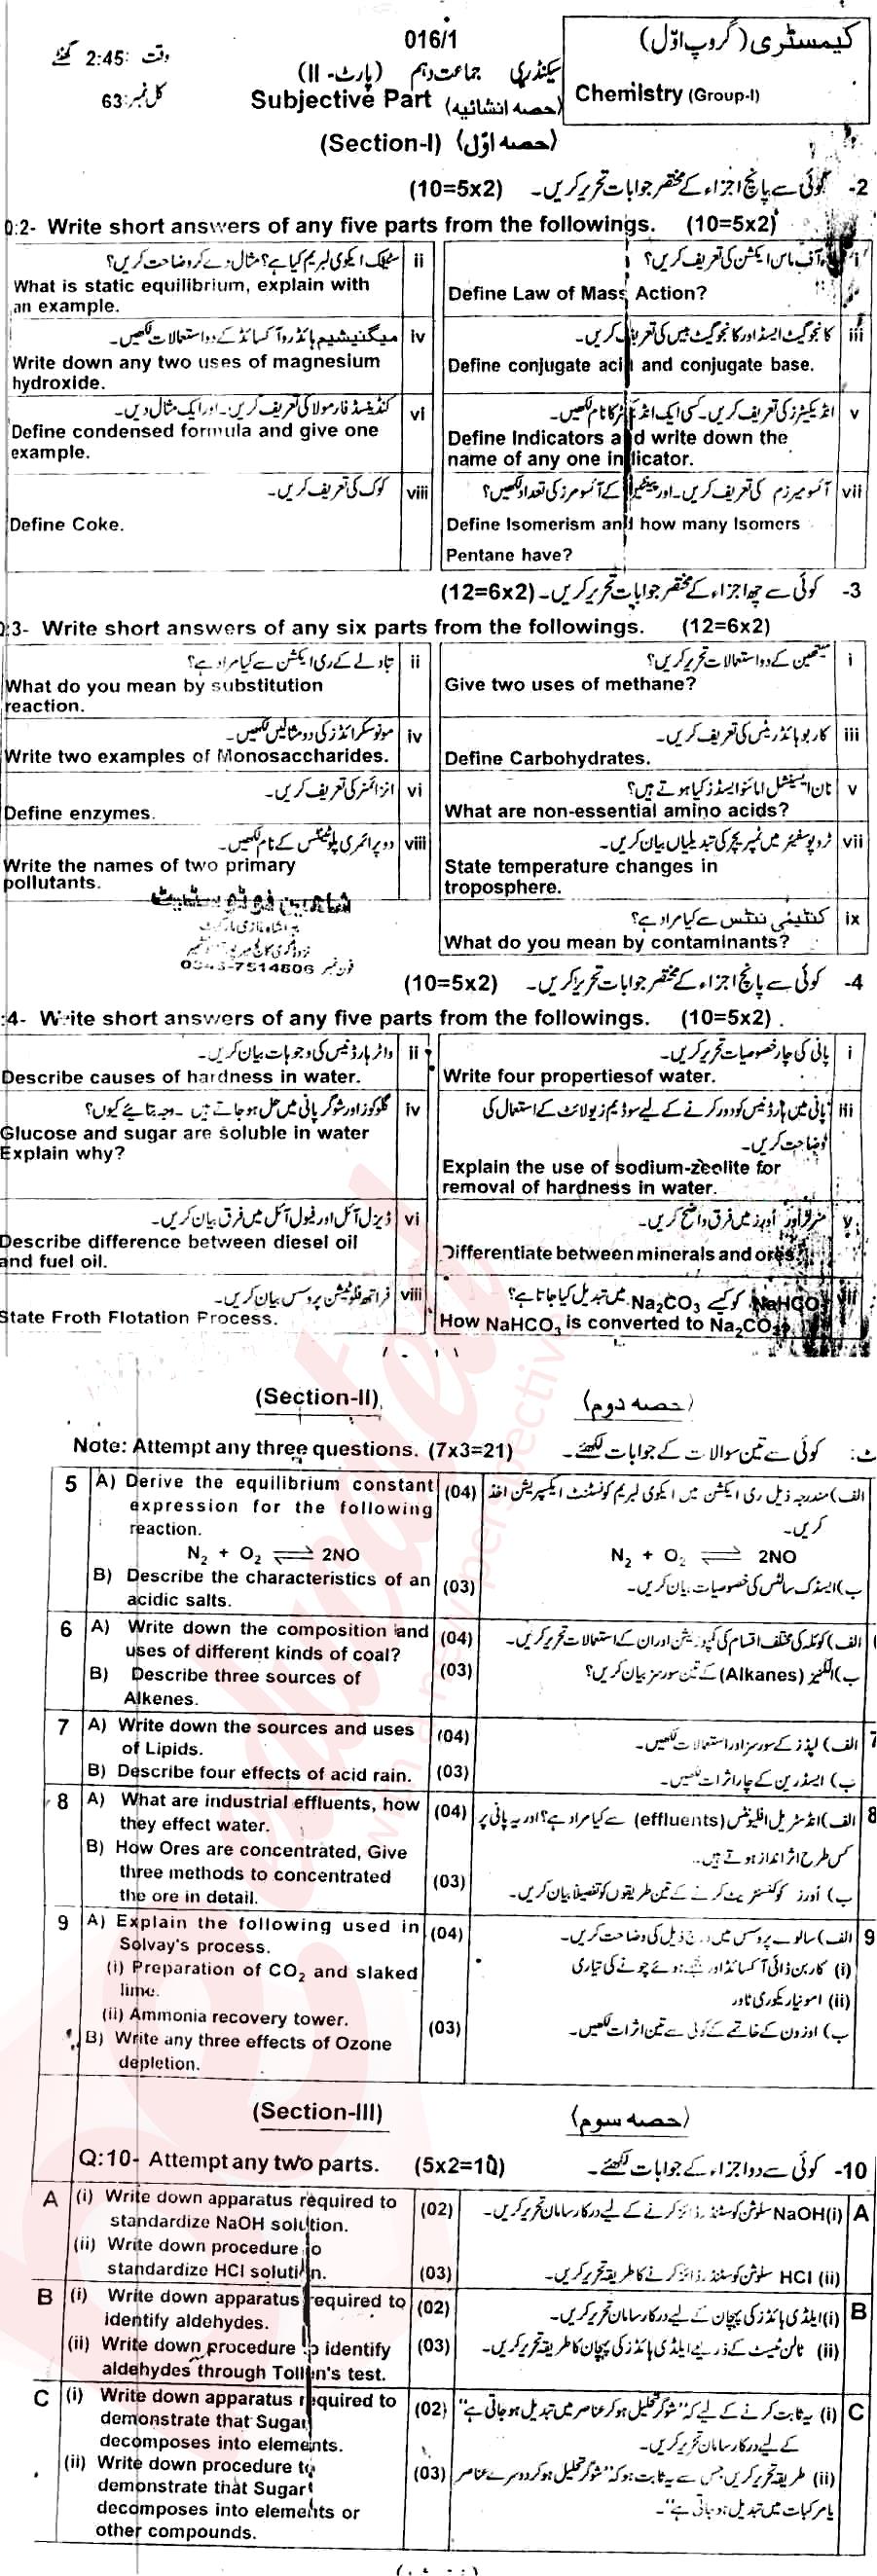 Chemistry 10th English Medium Past Paper Group 1 BISE AJK 2016